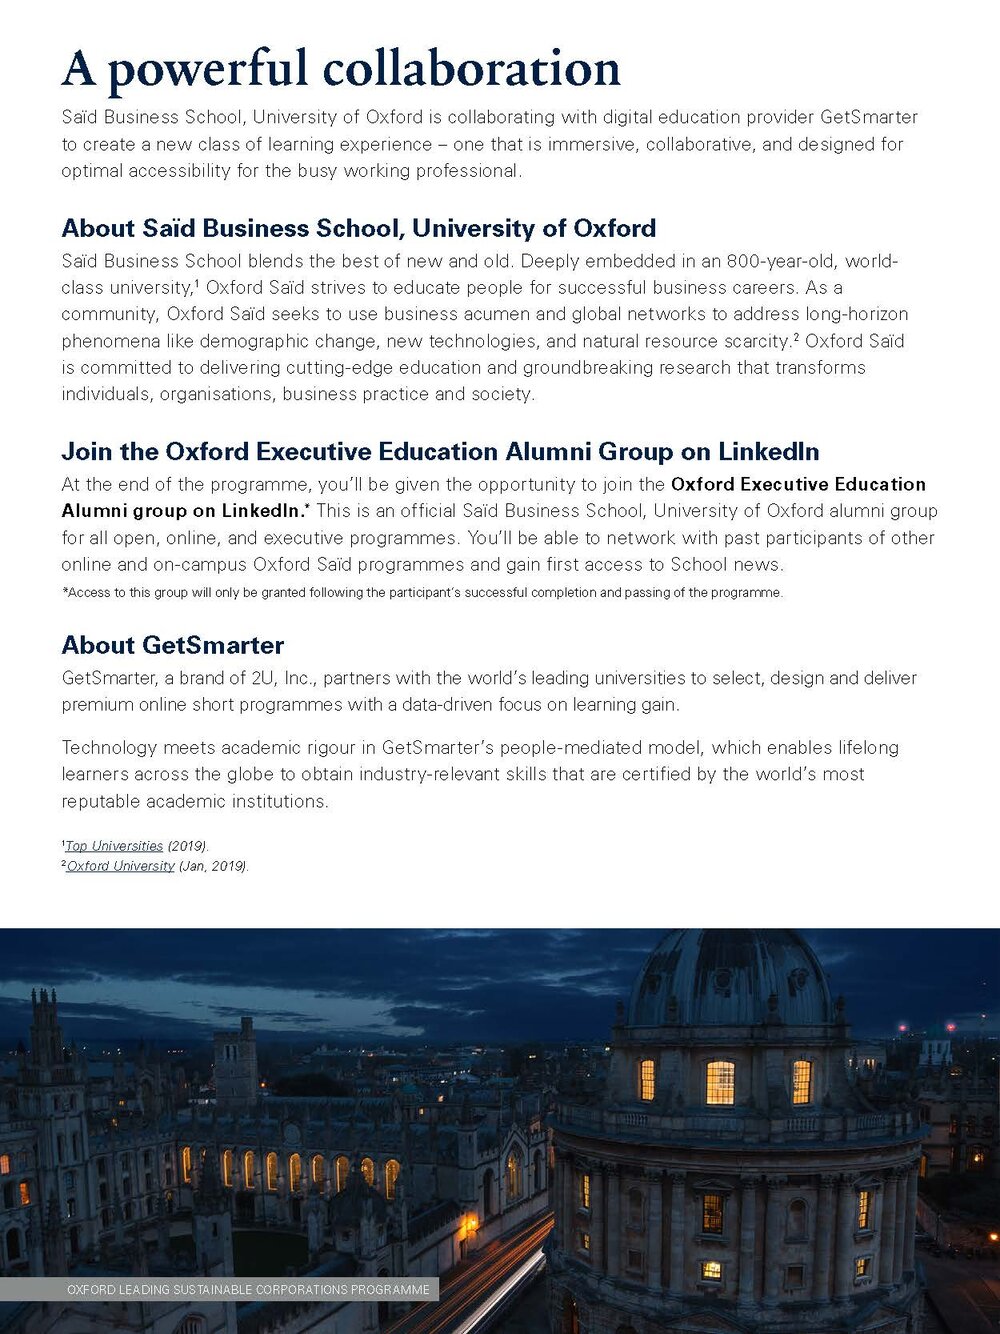 oxford-leading-sustainable-corporations-programme-prospectus_Page_09.jpg